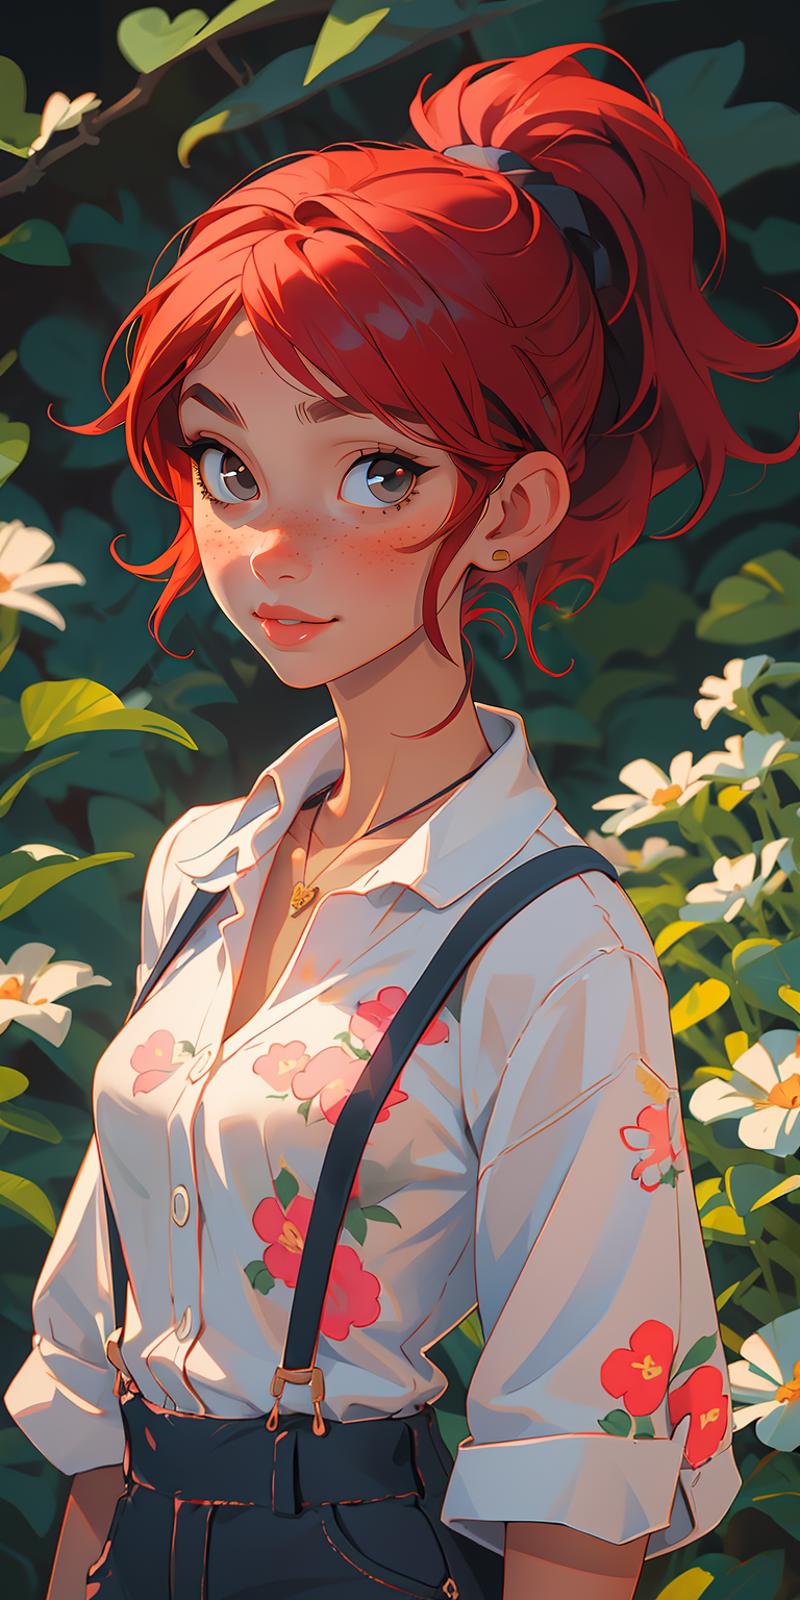 A young woman with red hair, wearing a white shirt and suspenders, stands in a field of white flowers.